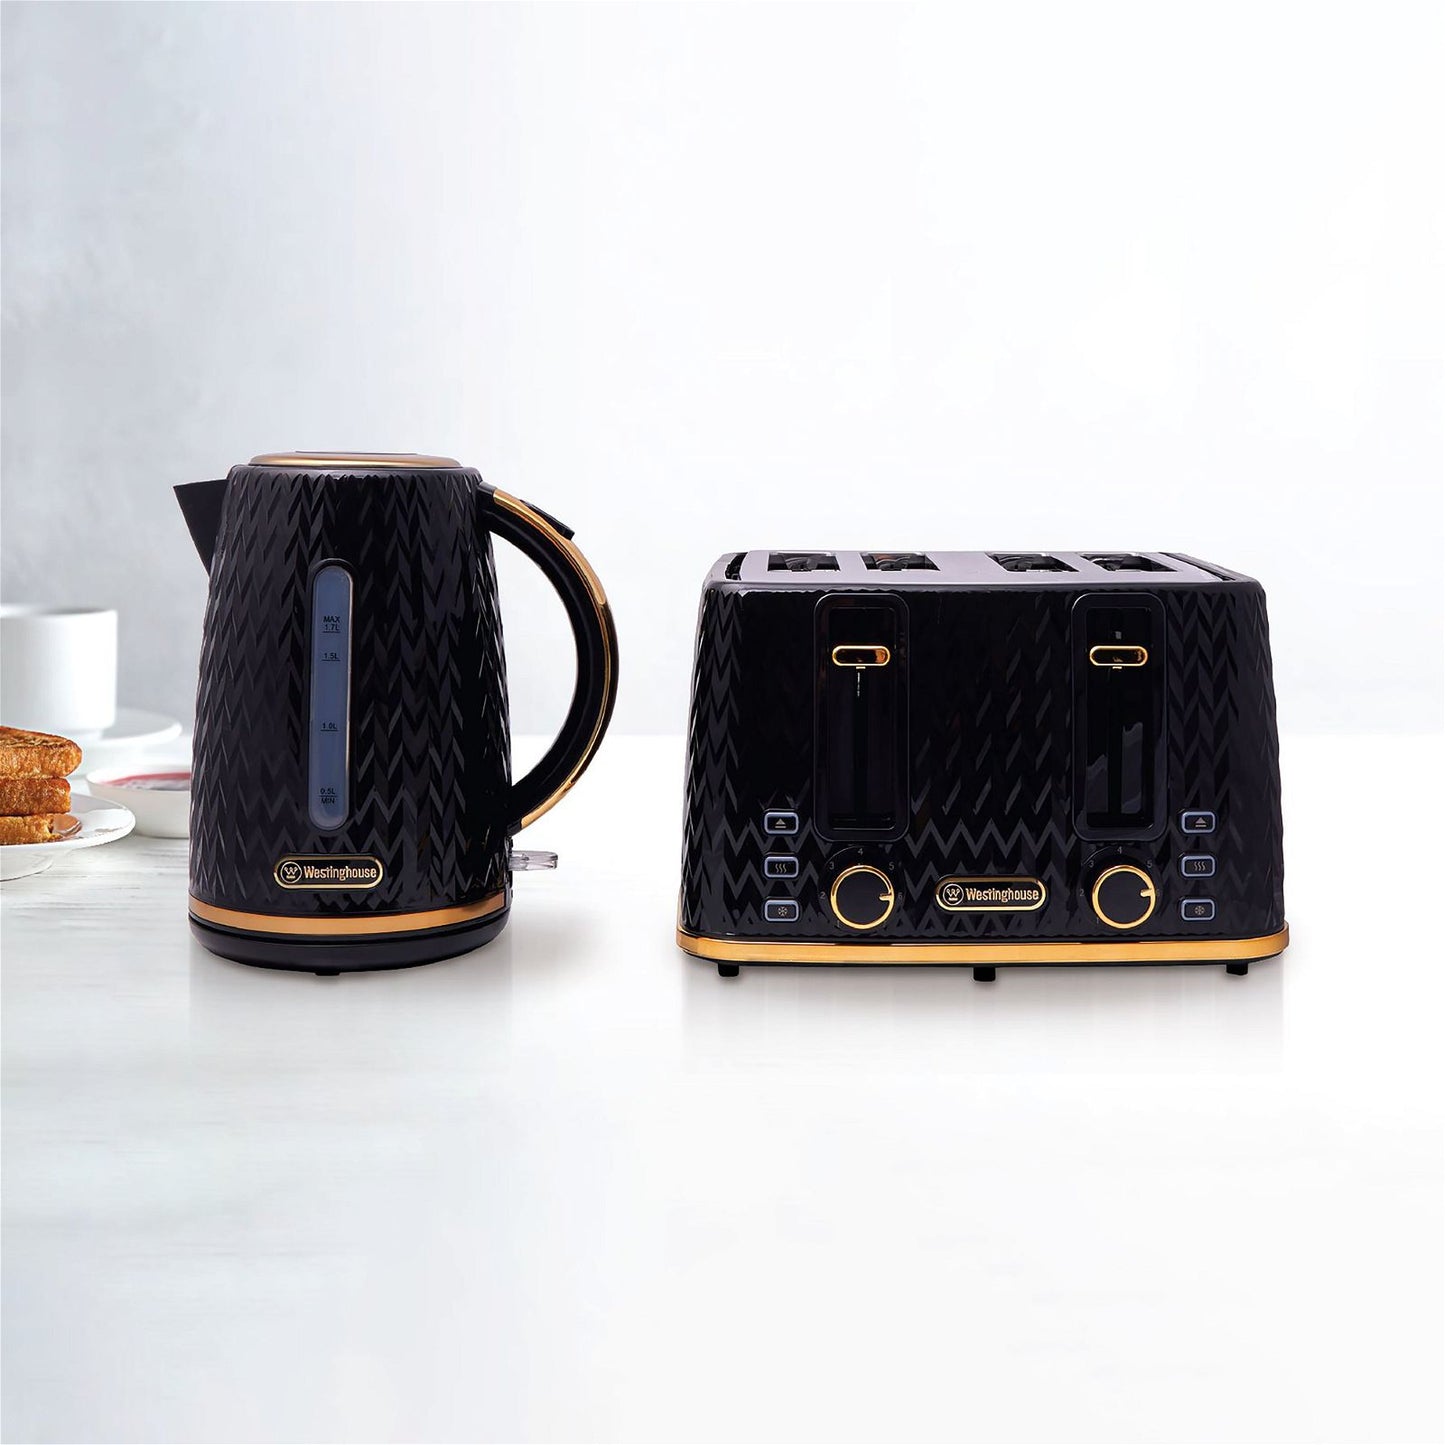 Westinghouse Kettle and Toaster Pack Black Gold 1.7L Kettle, 4 Slice Toaster-#product_category#- Distributed by: RVM under license